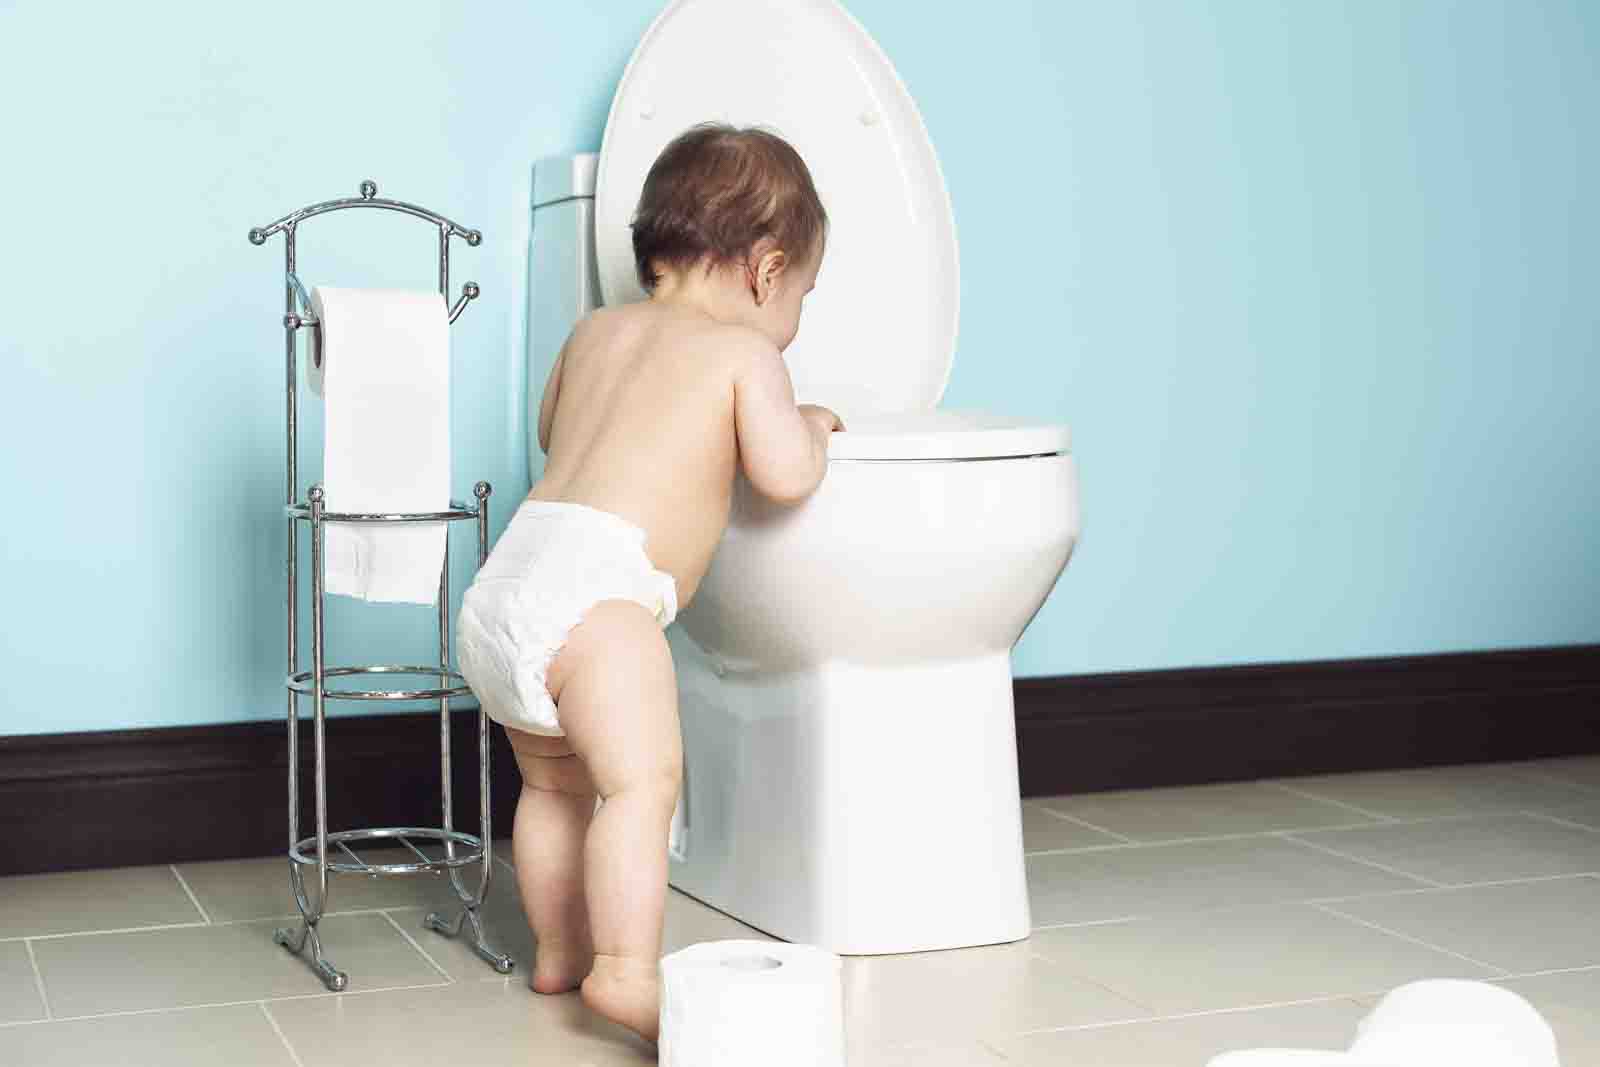 Tips for Potty Training Boys Advice on When to Start Potty Training and How to Toilet Train